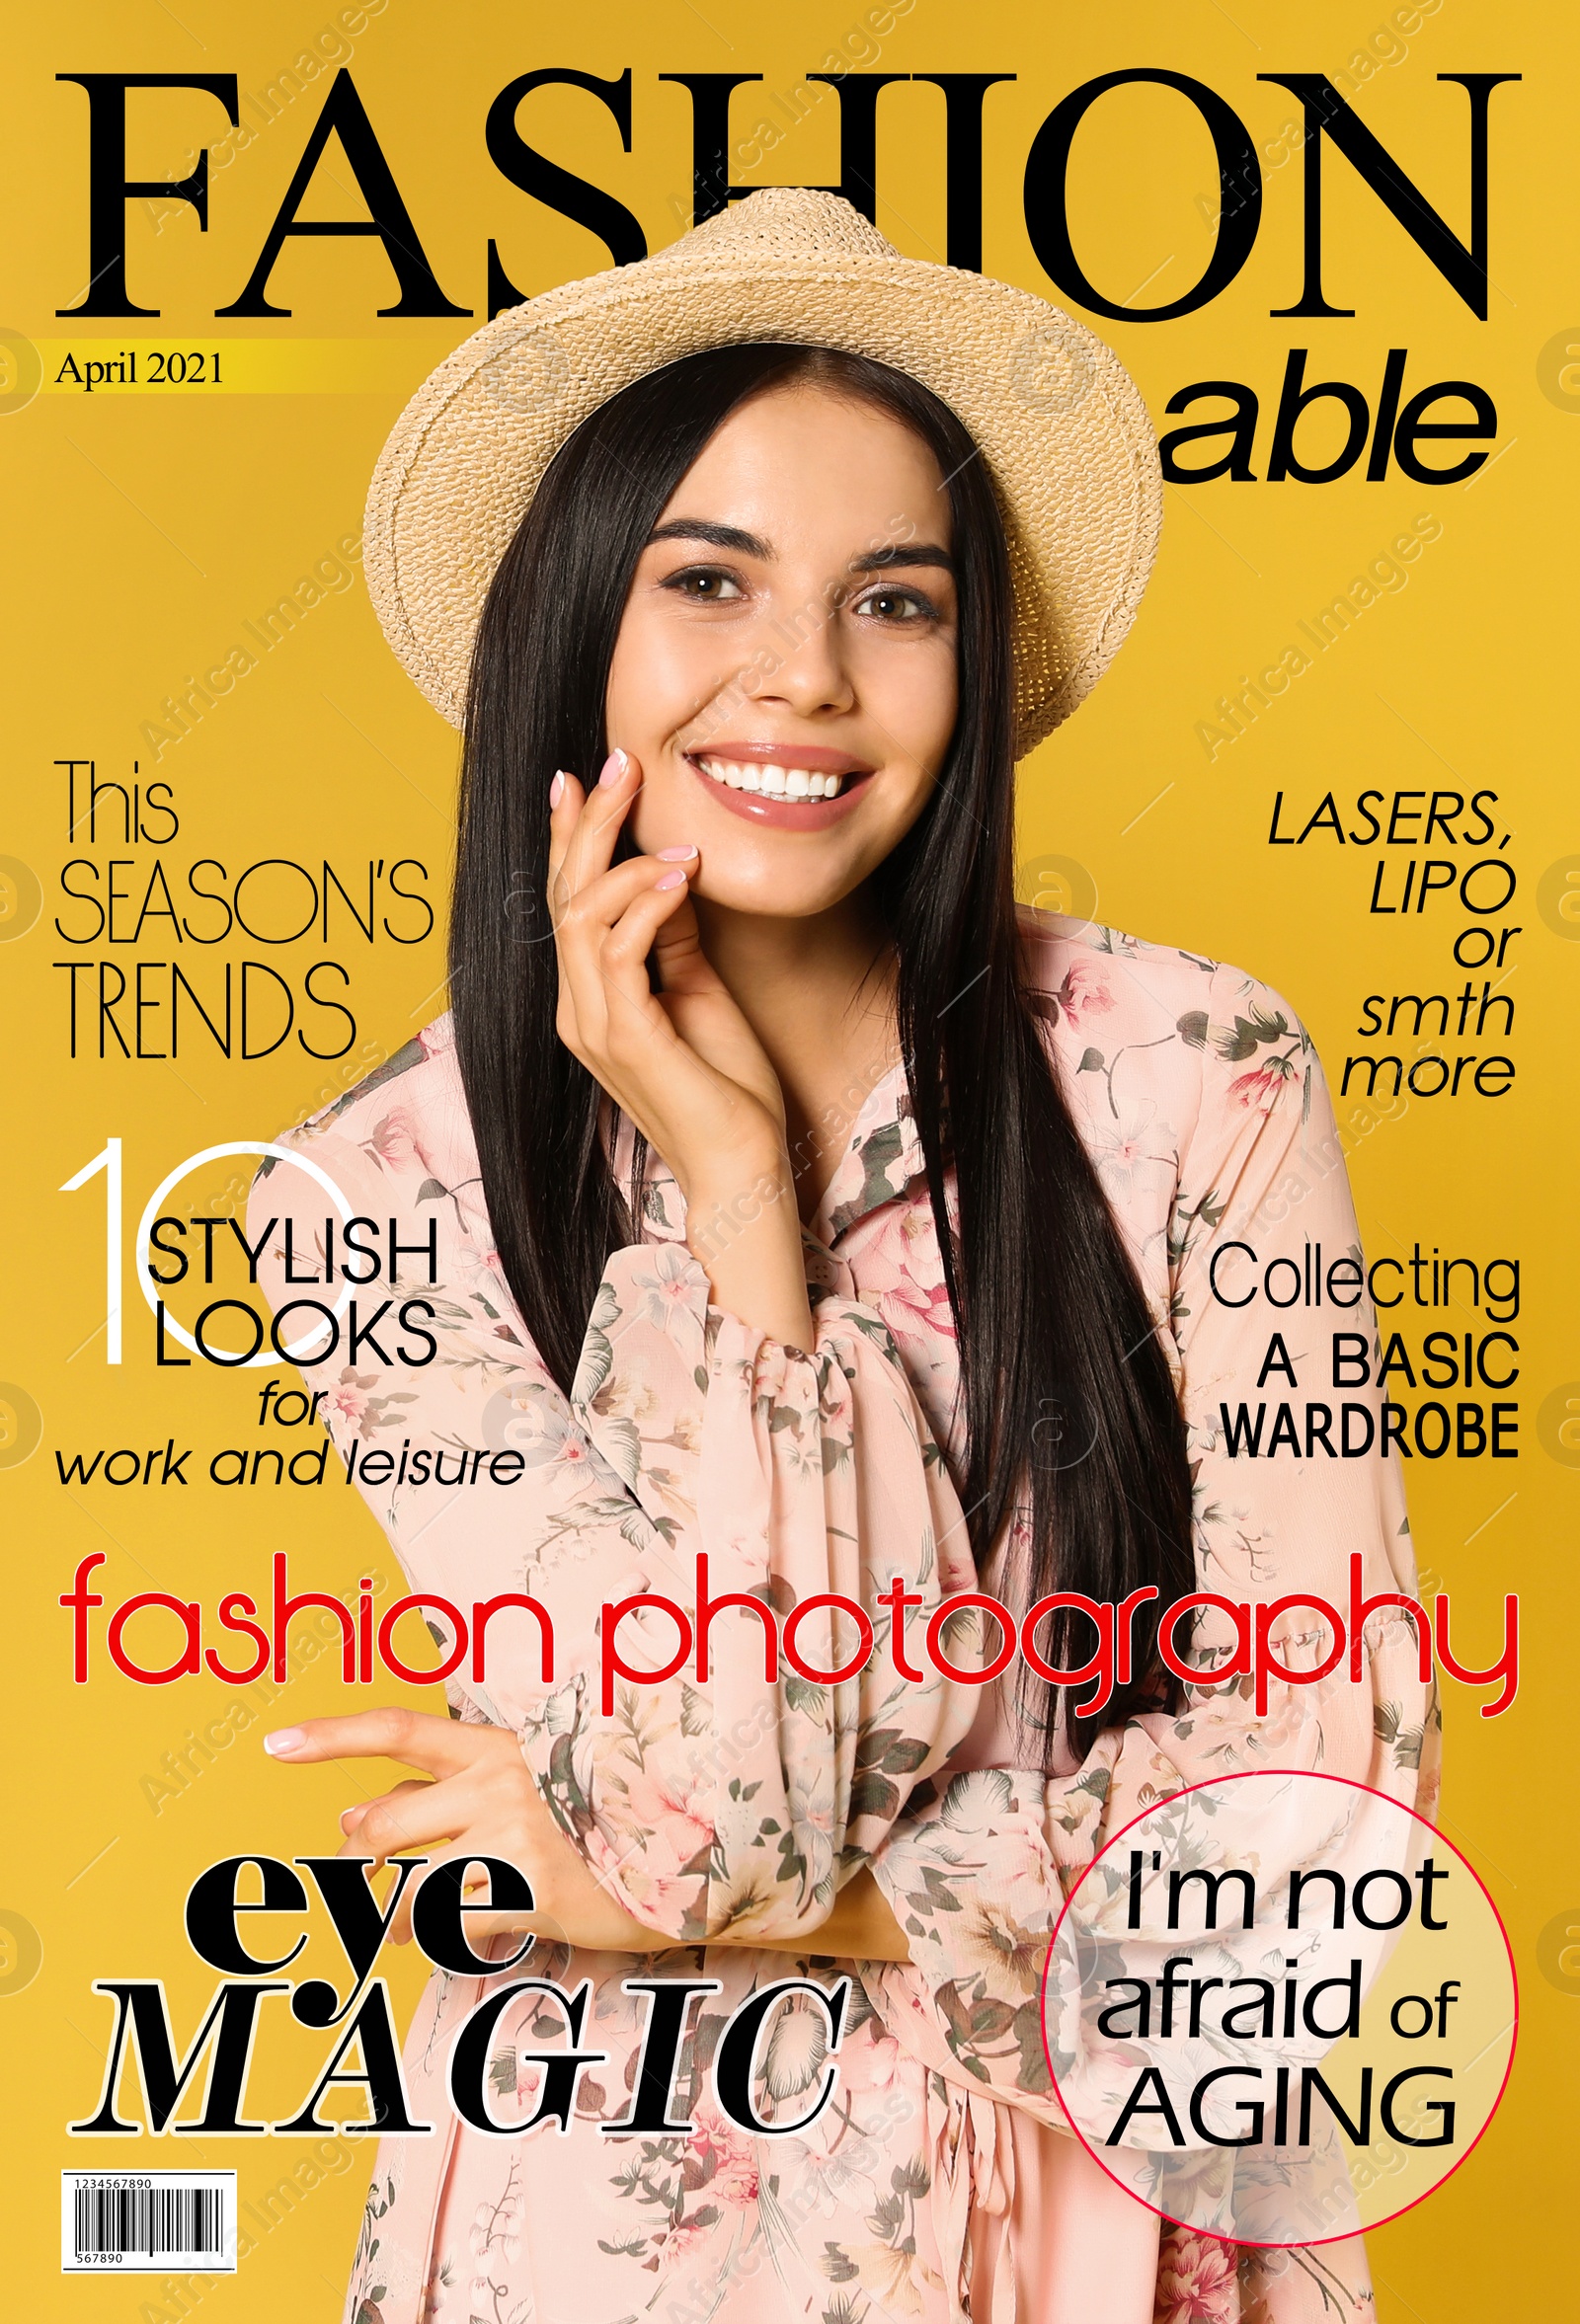 Image of Fashion magazine cover design. Young woman wearing floral print dress and straw hat on yellow background